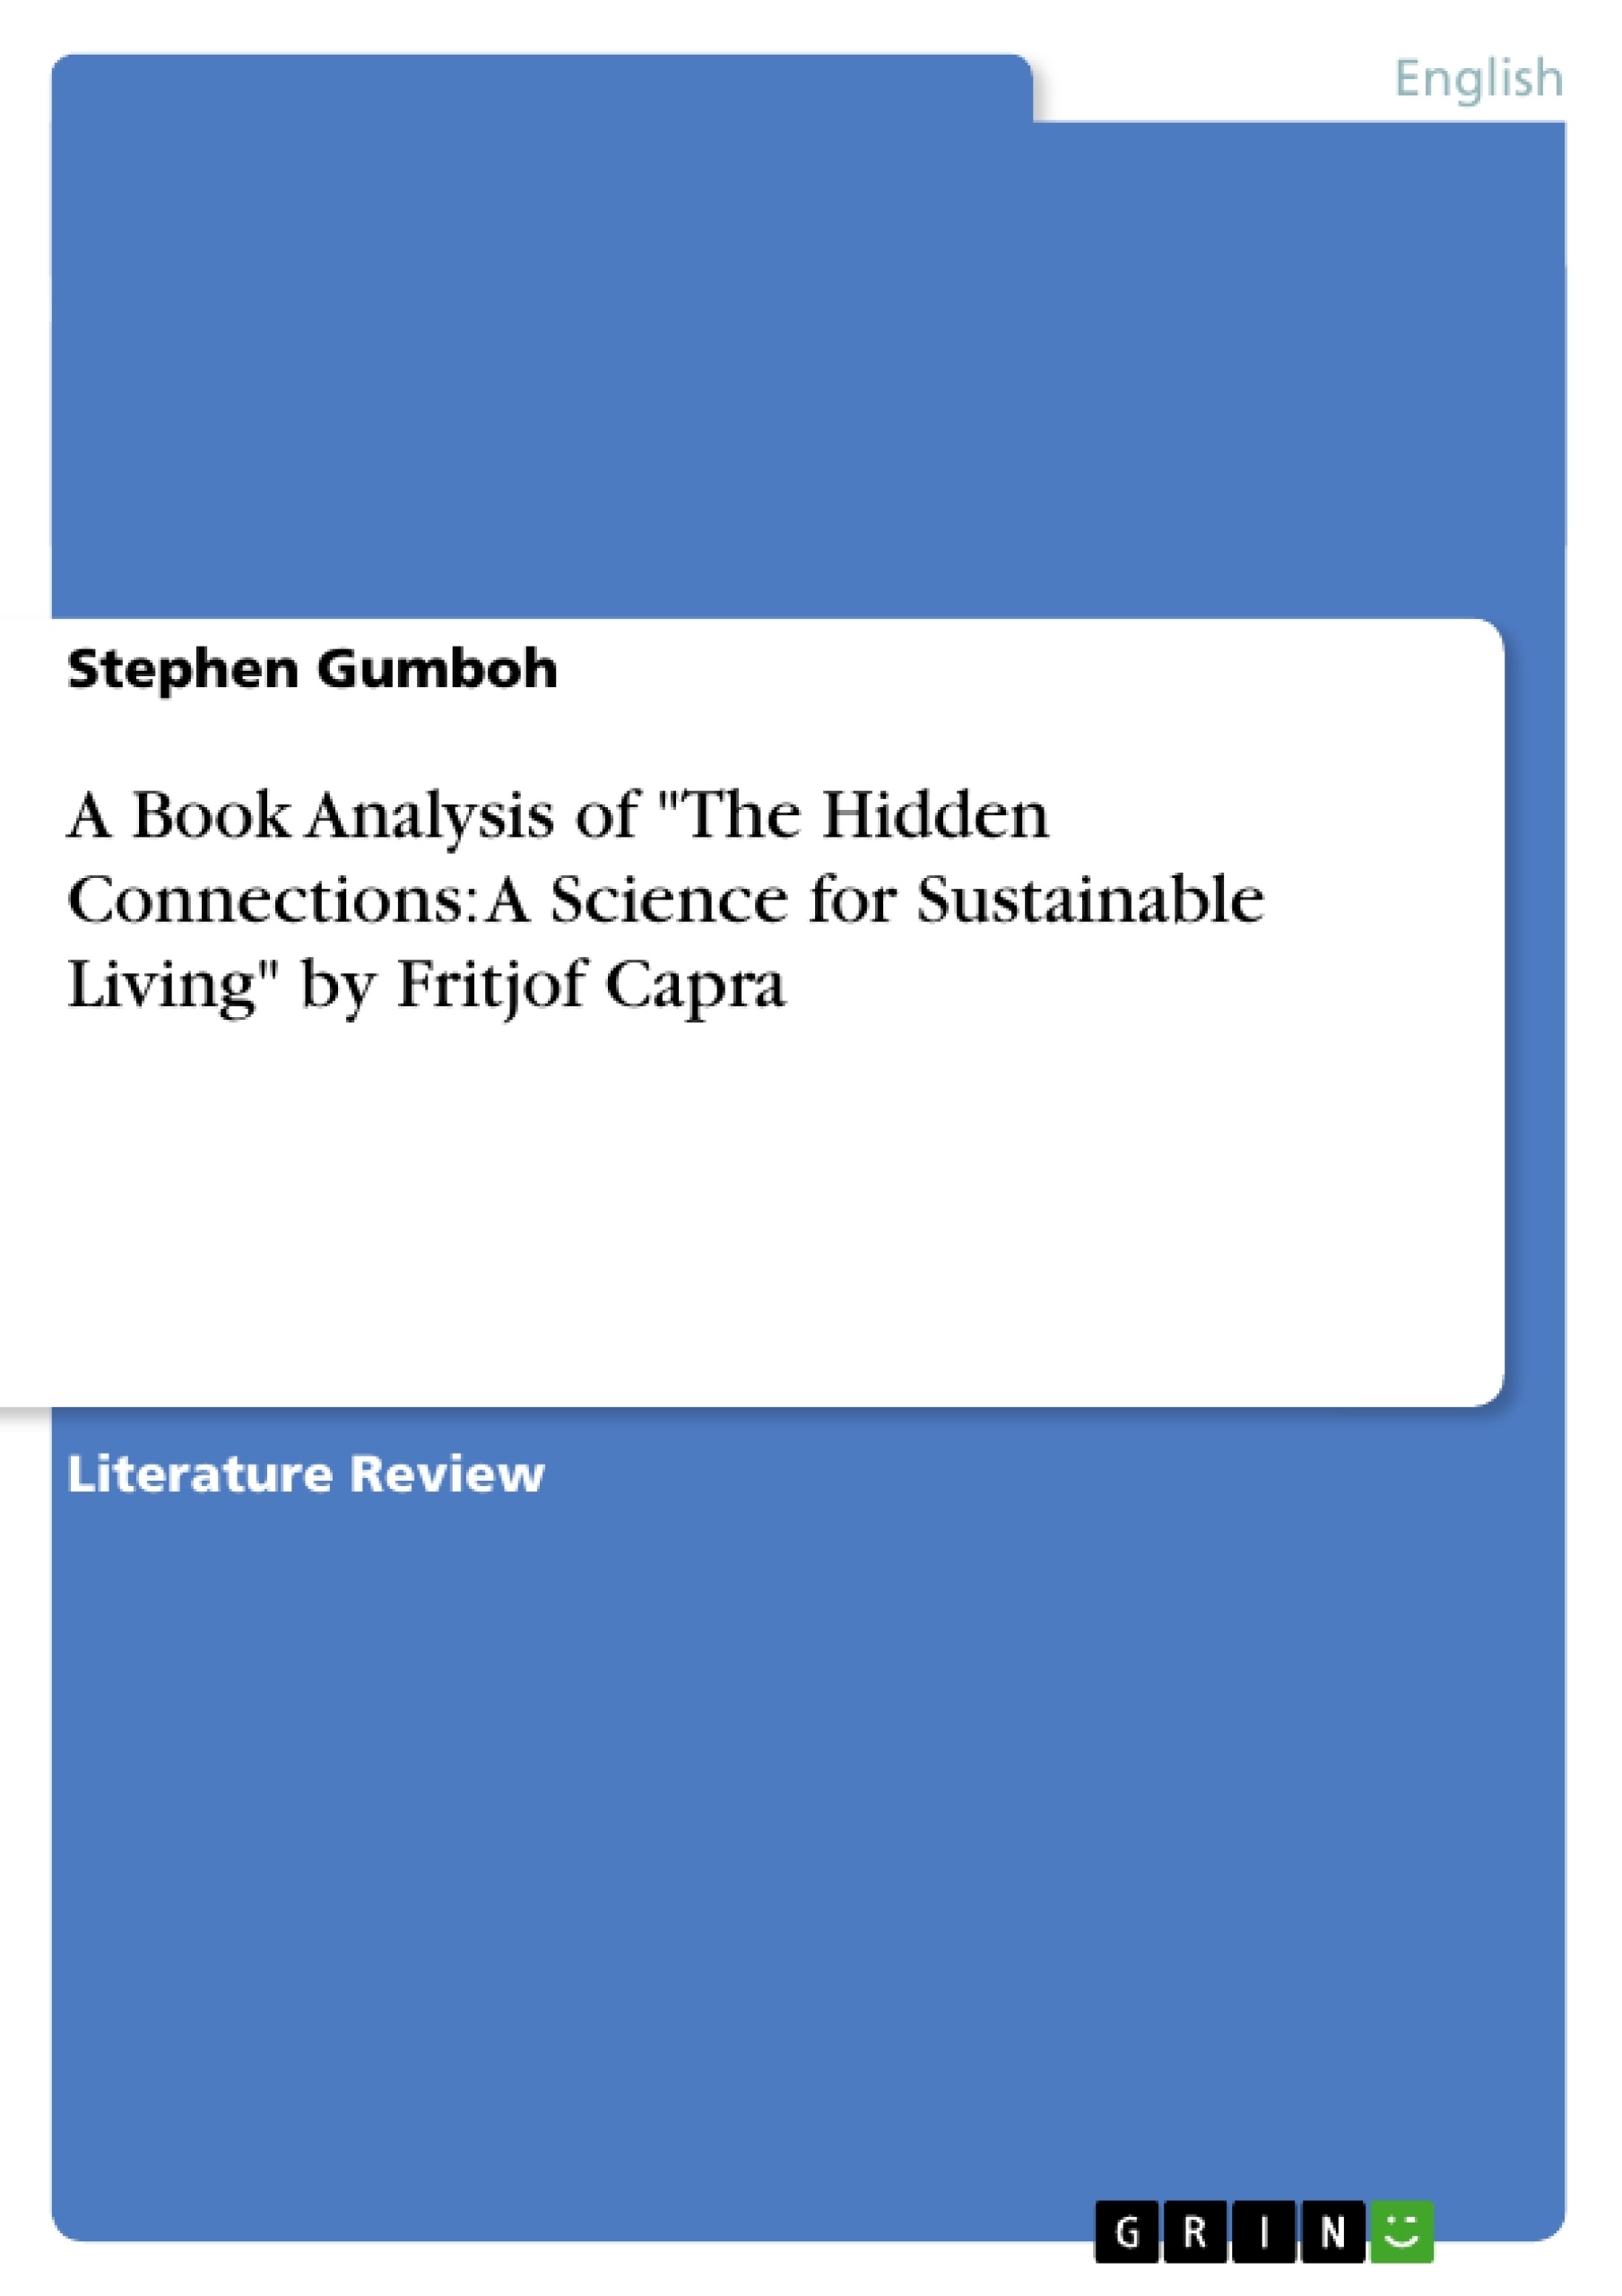 Titre: A Book Analysis of "The Hidden Connections: A Science for Sustainable Living" by Fritjof Capra